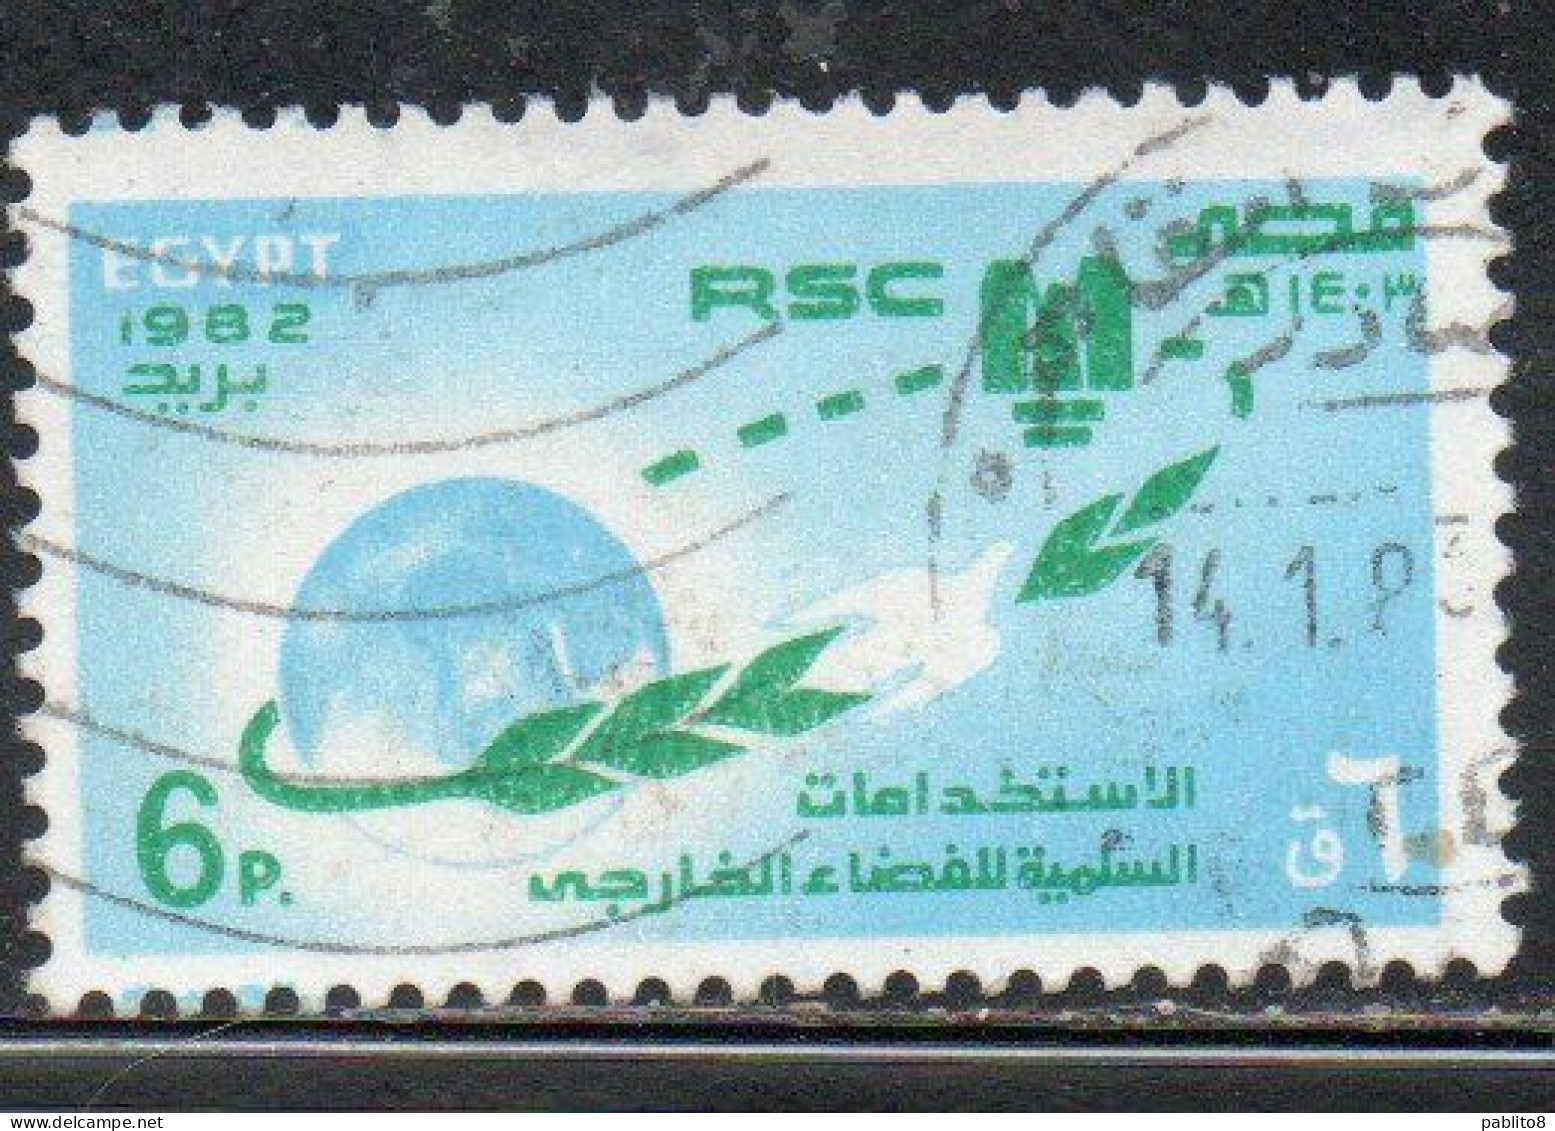 UAR EGYPT EGITTO 1982 UN ONU CONFERENCE ON PEACEFUL USES OF OUTER SPACE VIENNA 6p USED USATO OBLITERE' - Usati